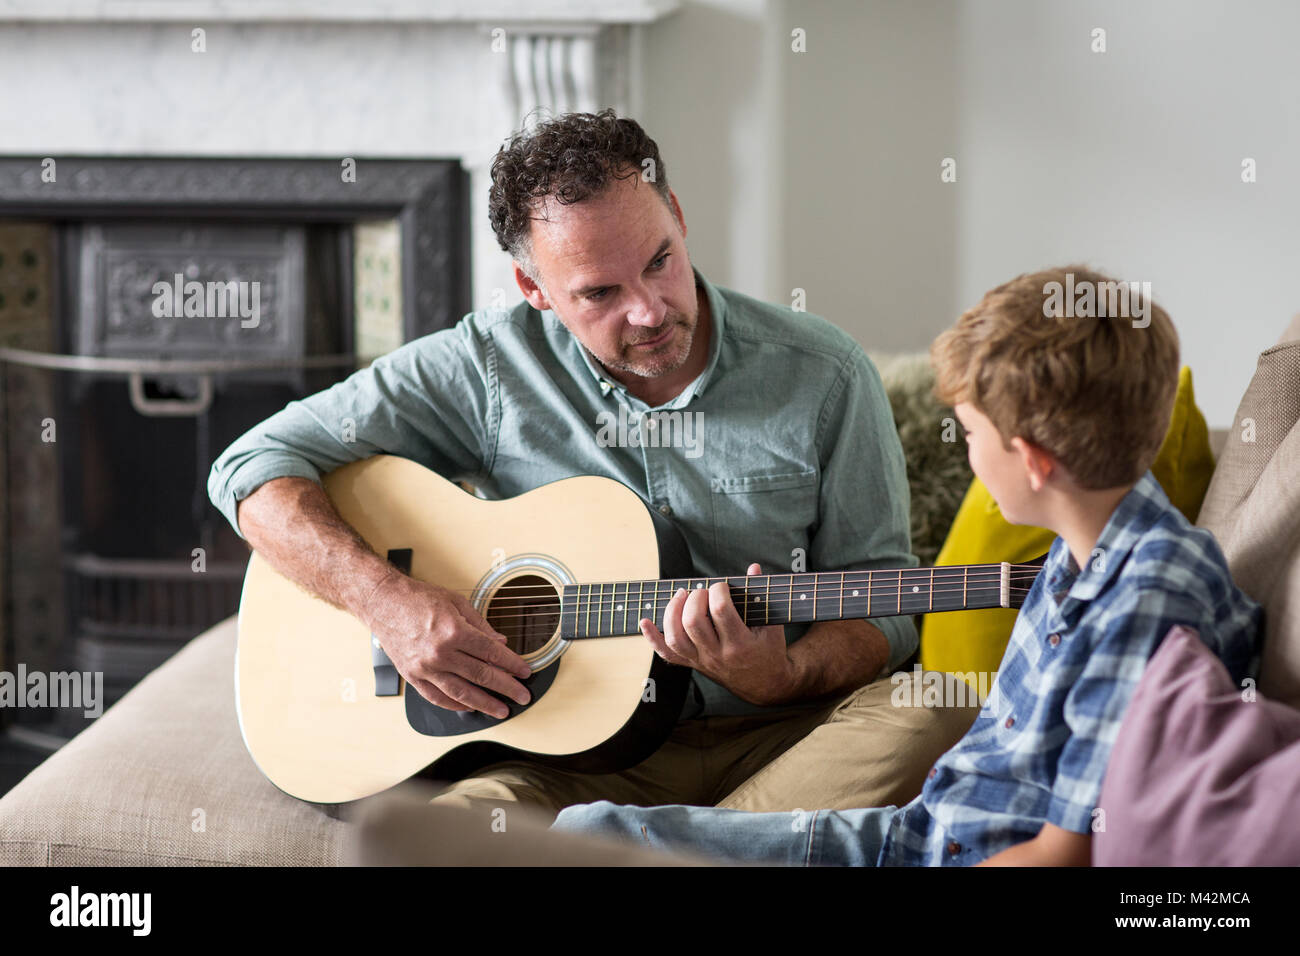 Father teaching son how to play guitar Stock Photo